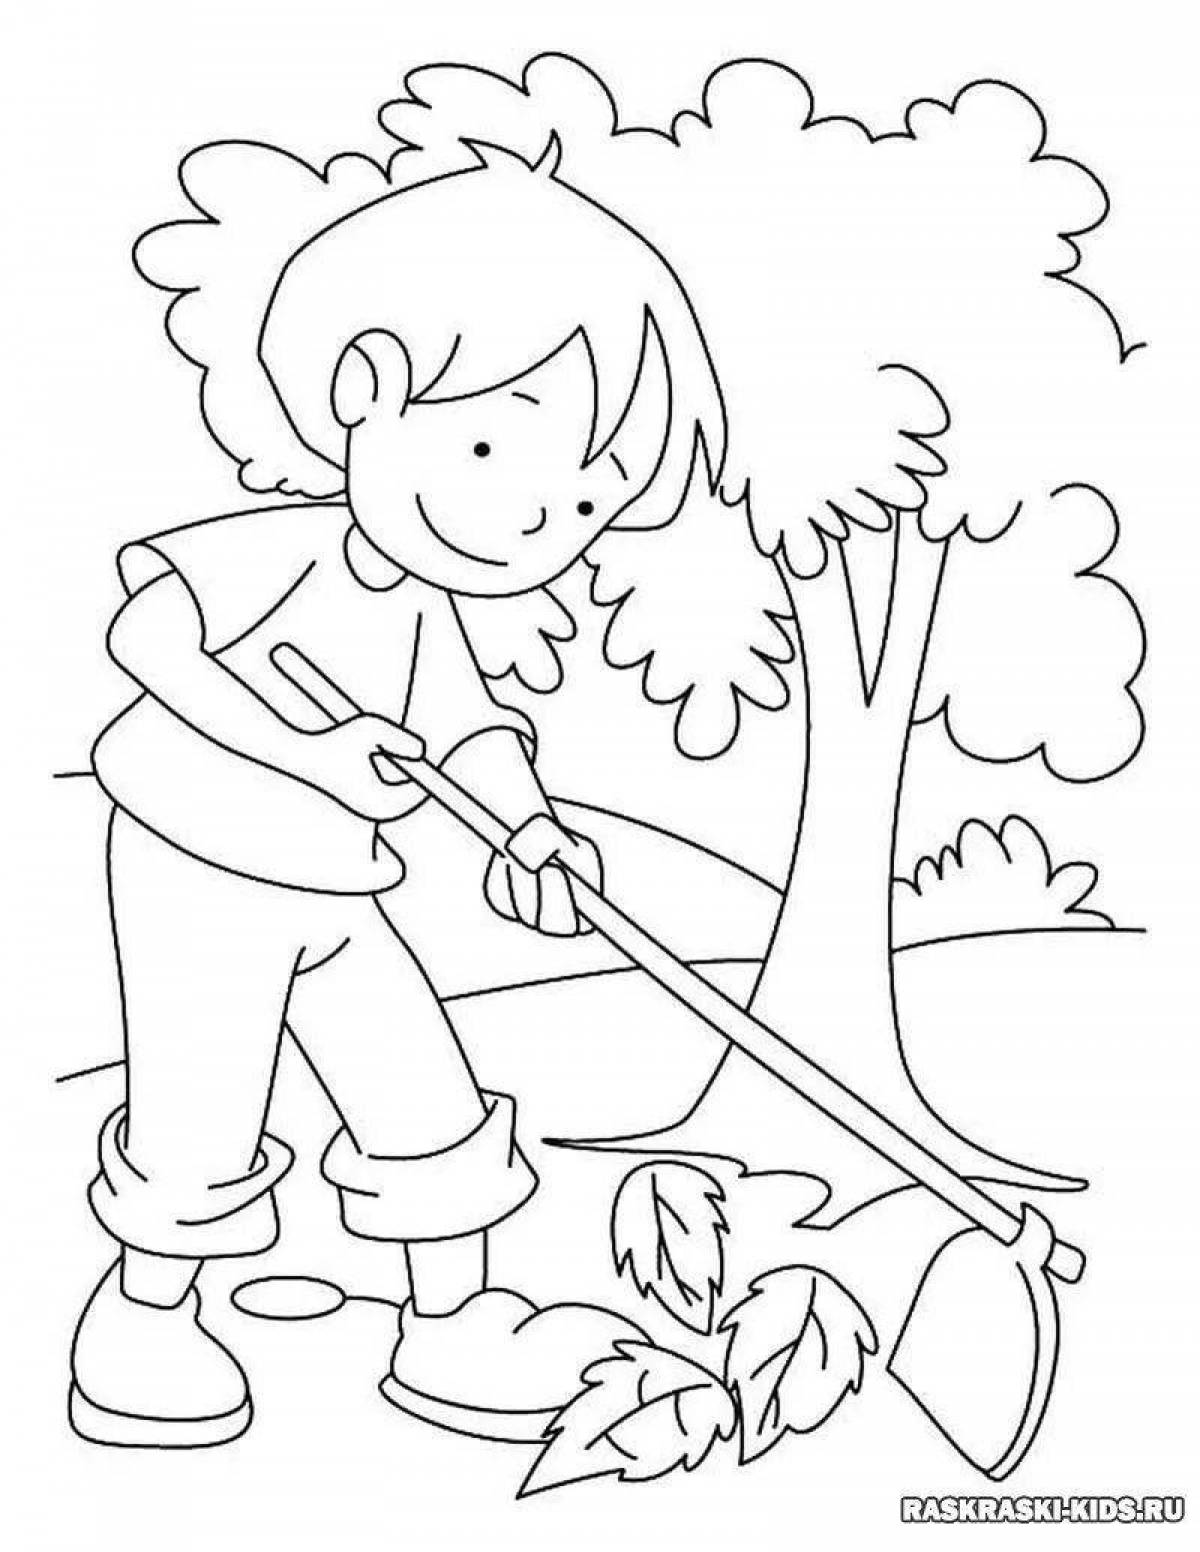 Radiant save nature coloring page